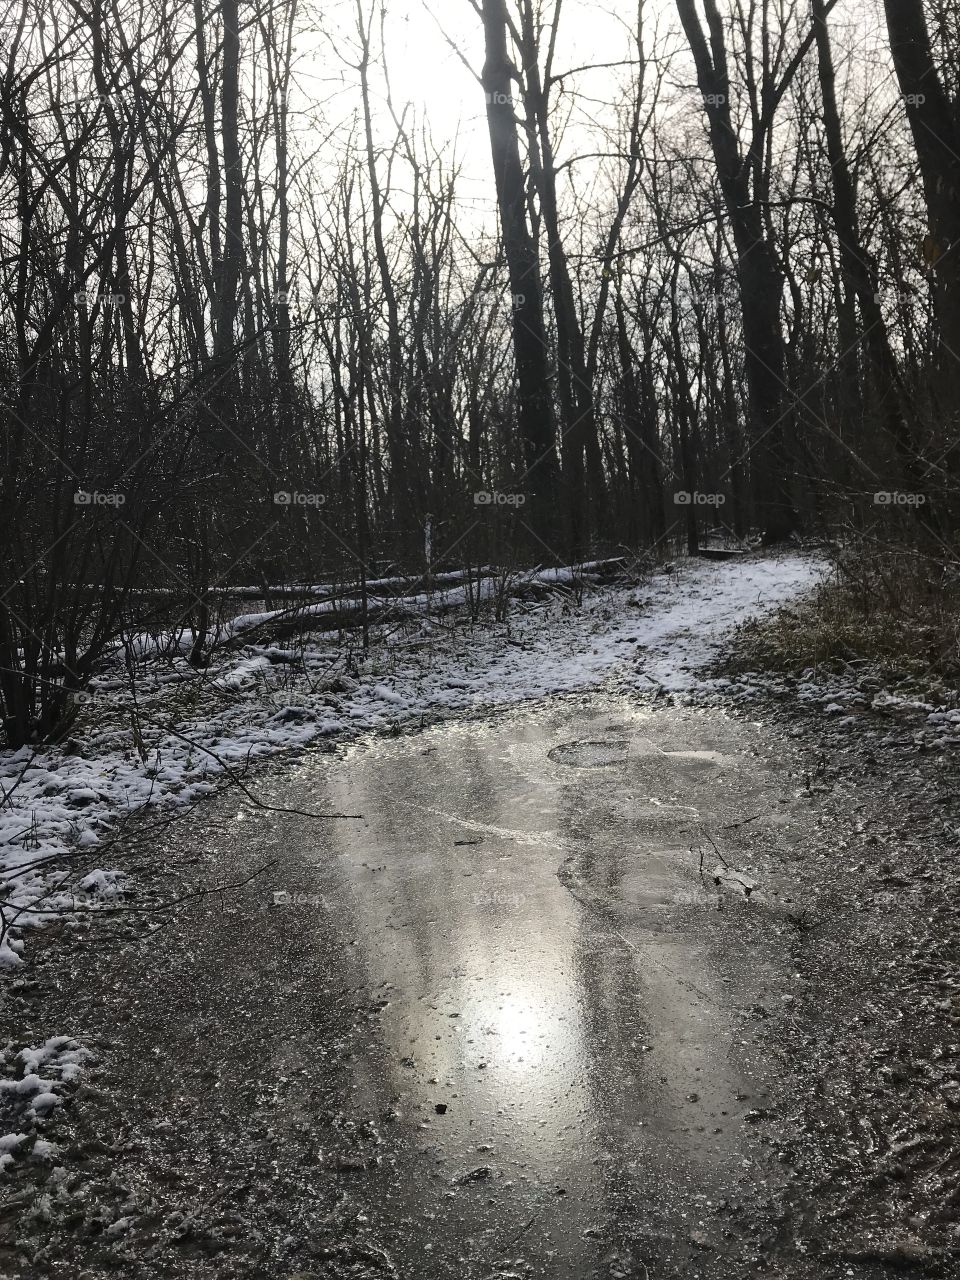 Ice and snow frozen over the trail. Trees and sunshine around. 